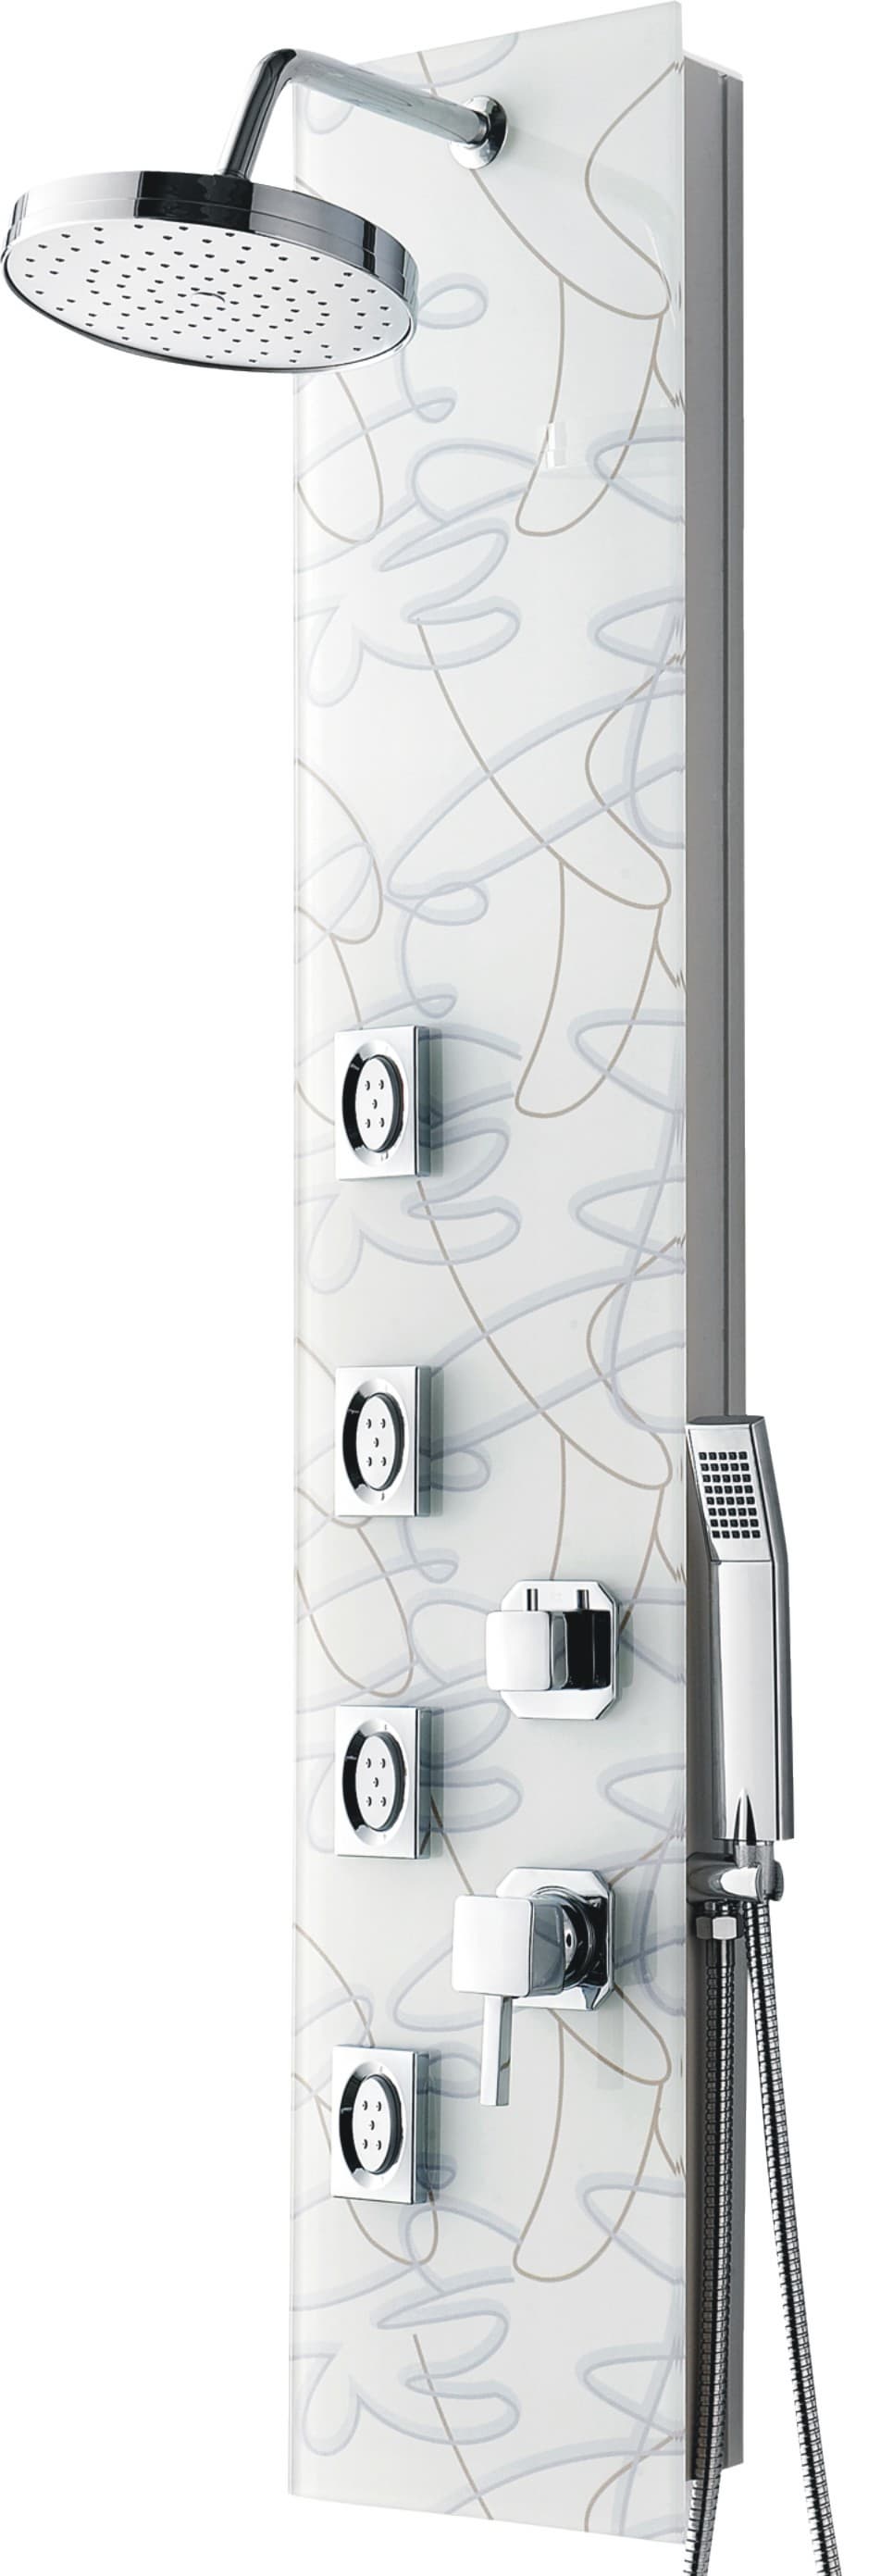 Tempered Glass shower panel